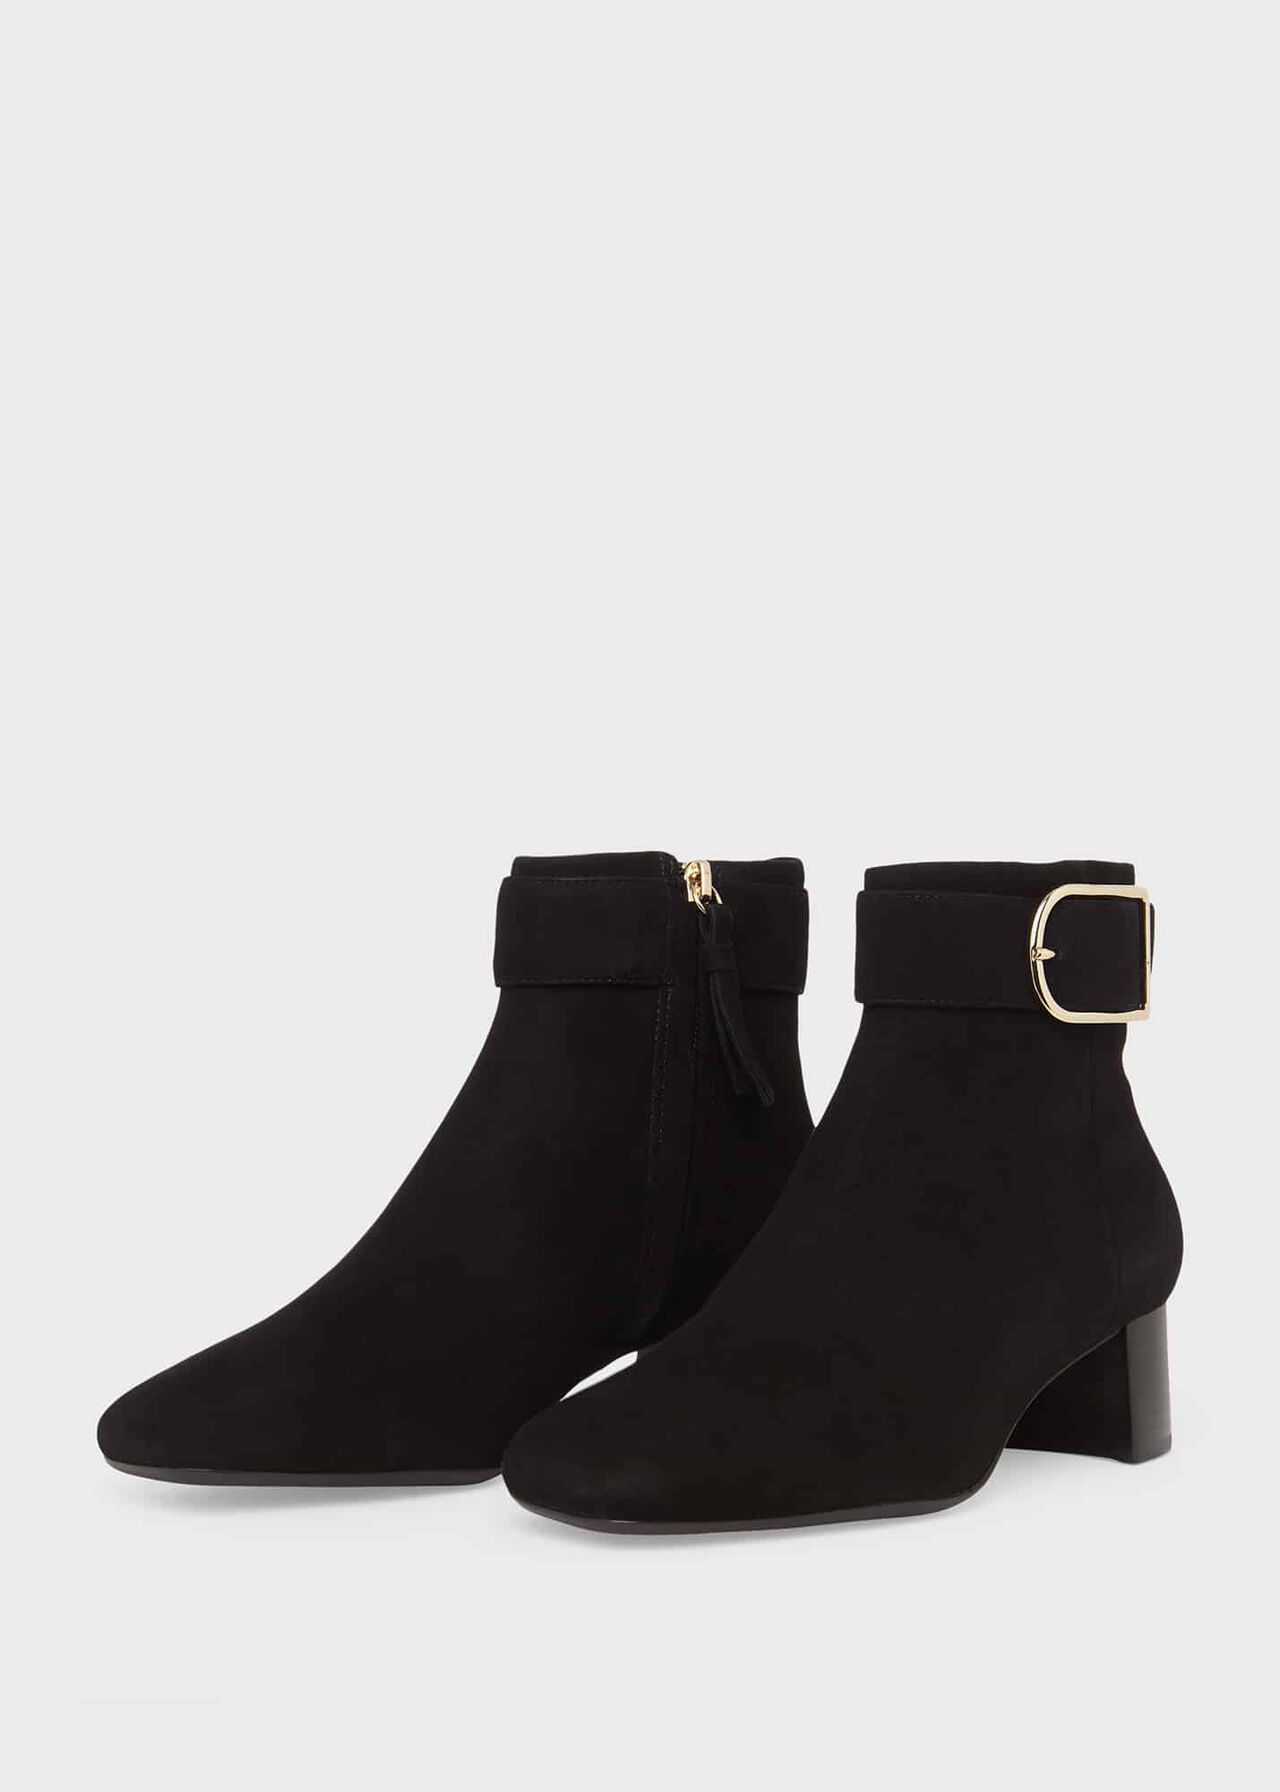 Suzannah Suede Ankle Boot, Black, hi-res